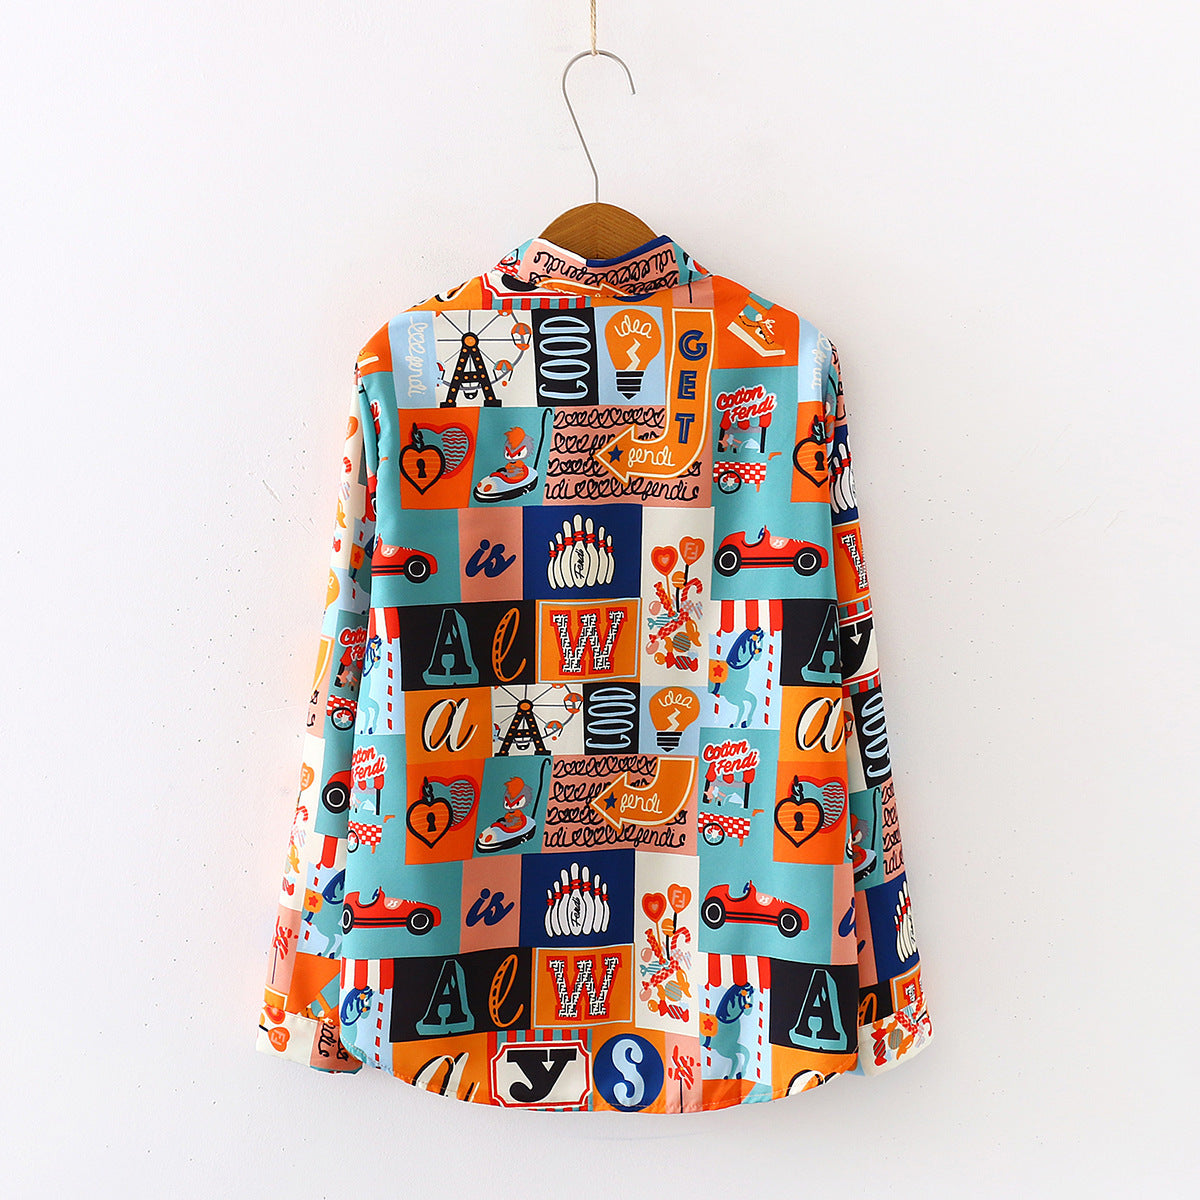 Beach chic with a collar: Women's printed beach shirt with lapels for a touch of elegance.